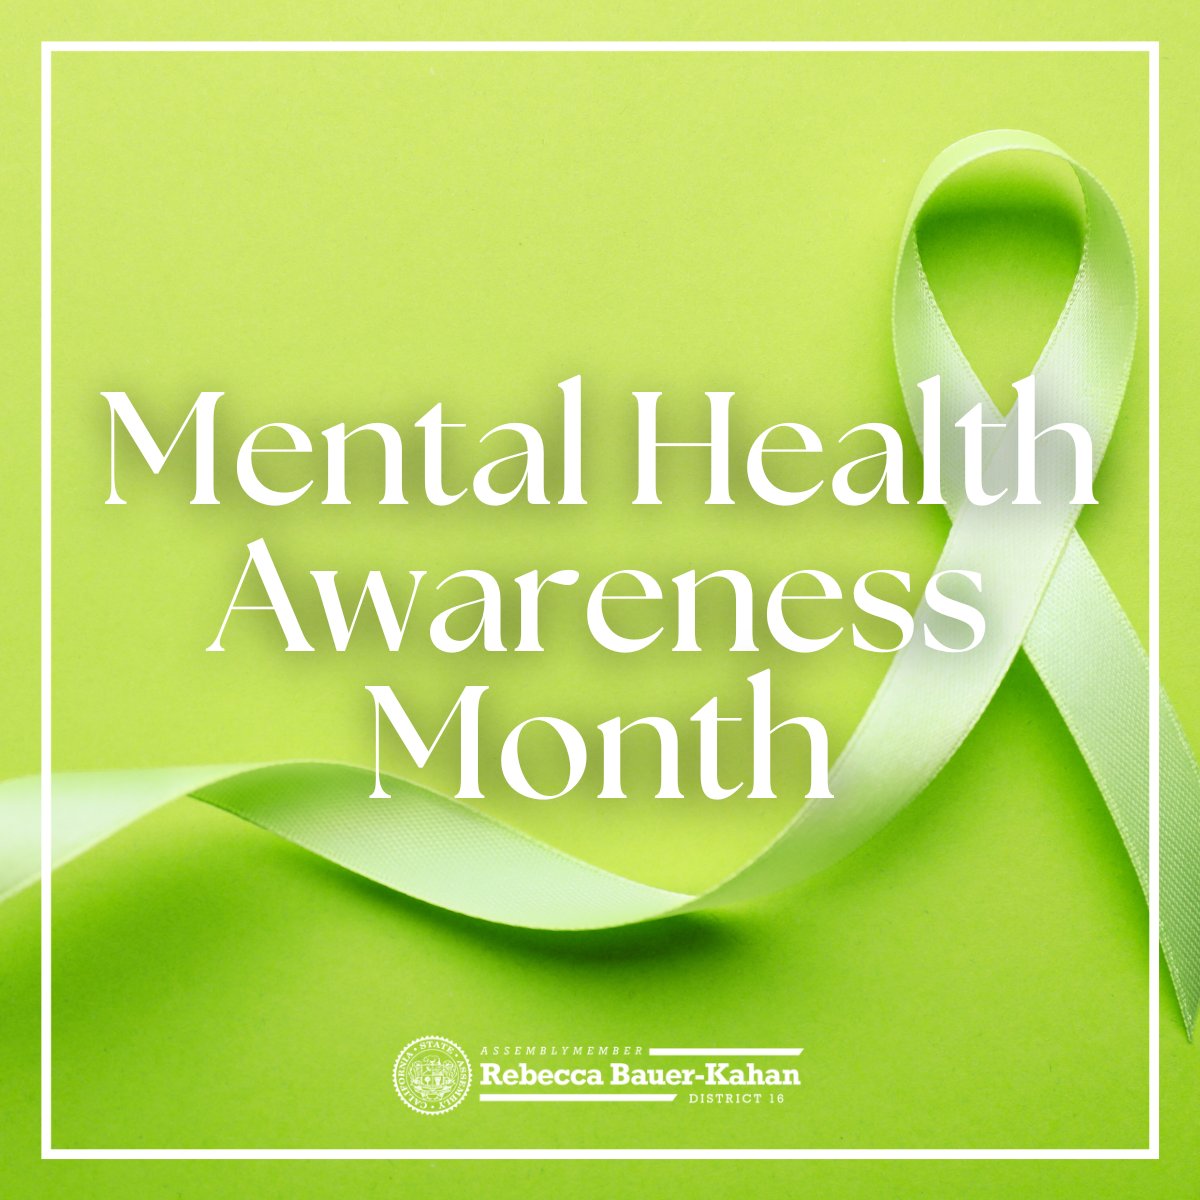 May is Mental Health Awareness Month. I'm proud of the work California has done to ensure that compassionate care is available for those in crisis through my legislation, AB 988. Remember—help is there for those who need it.